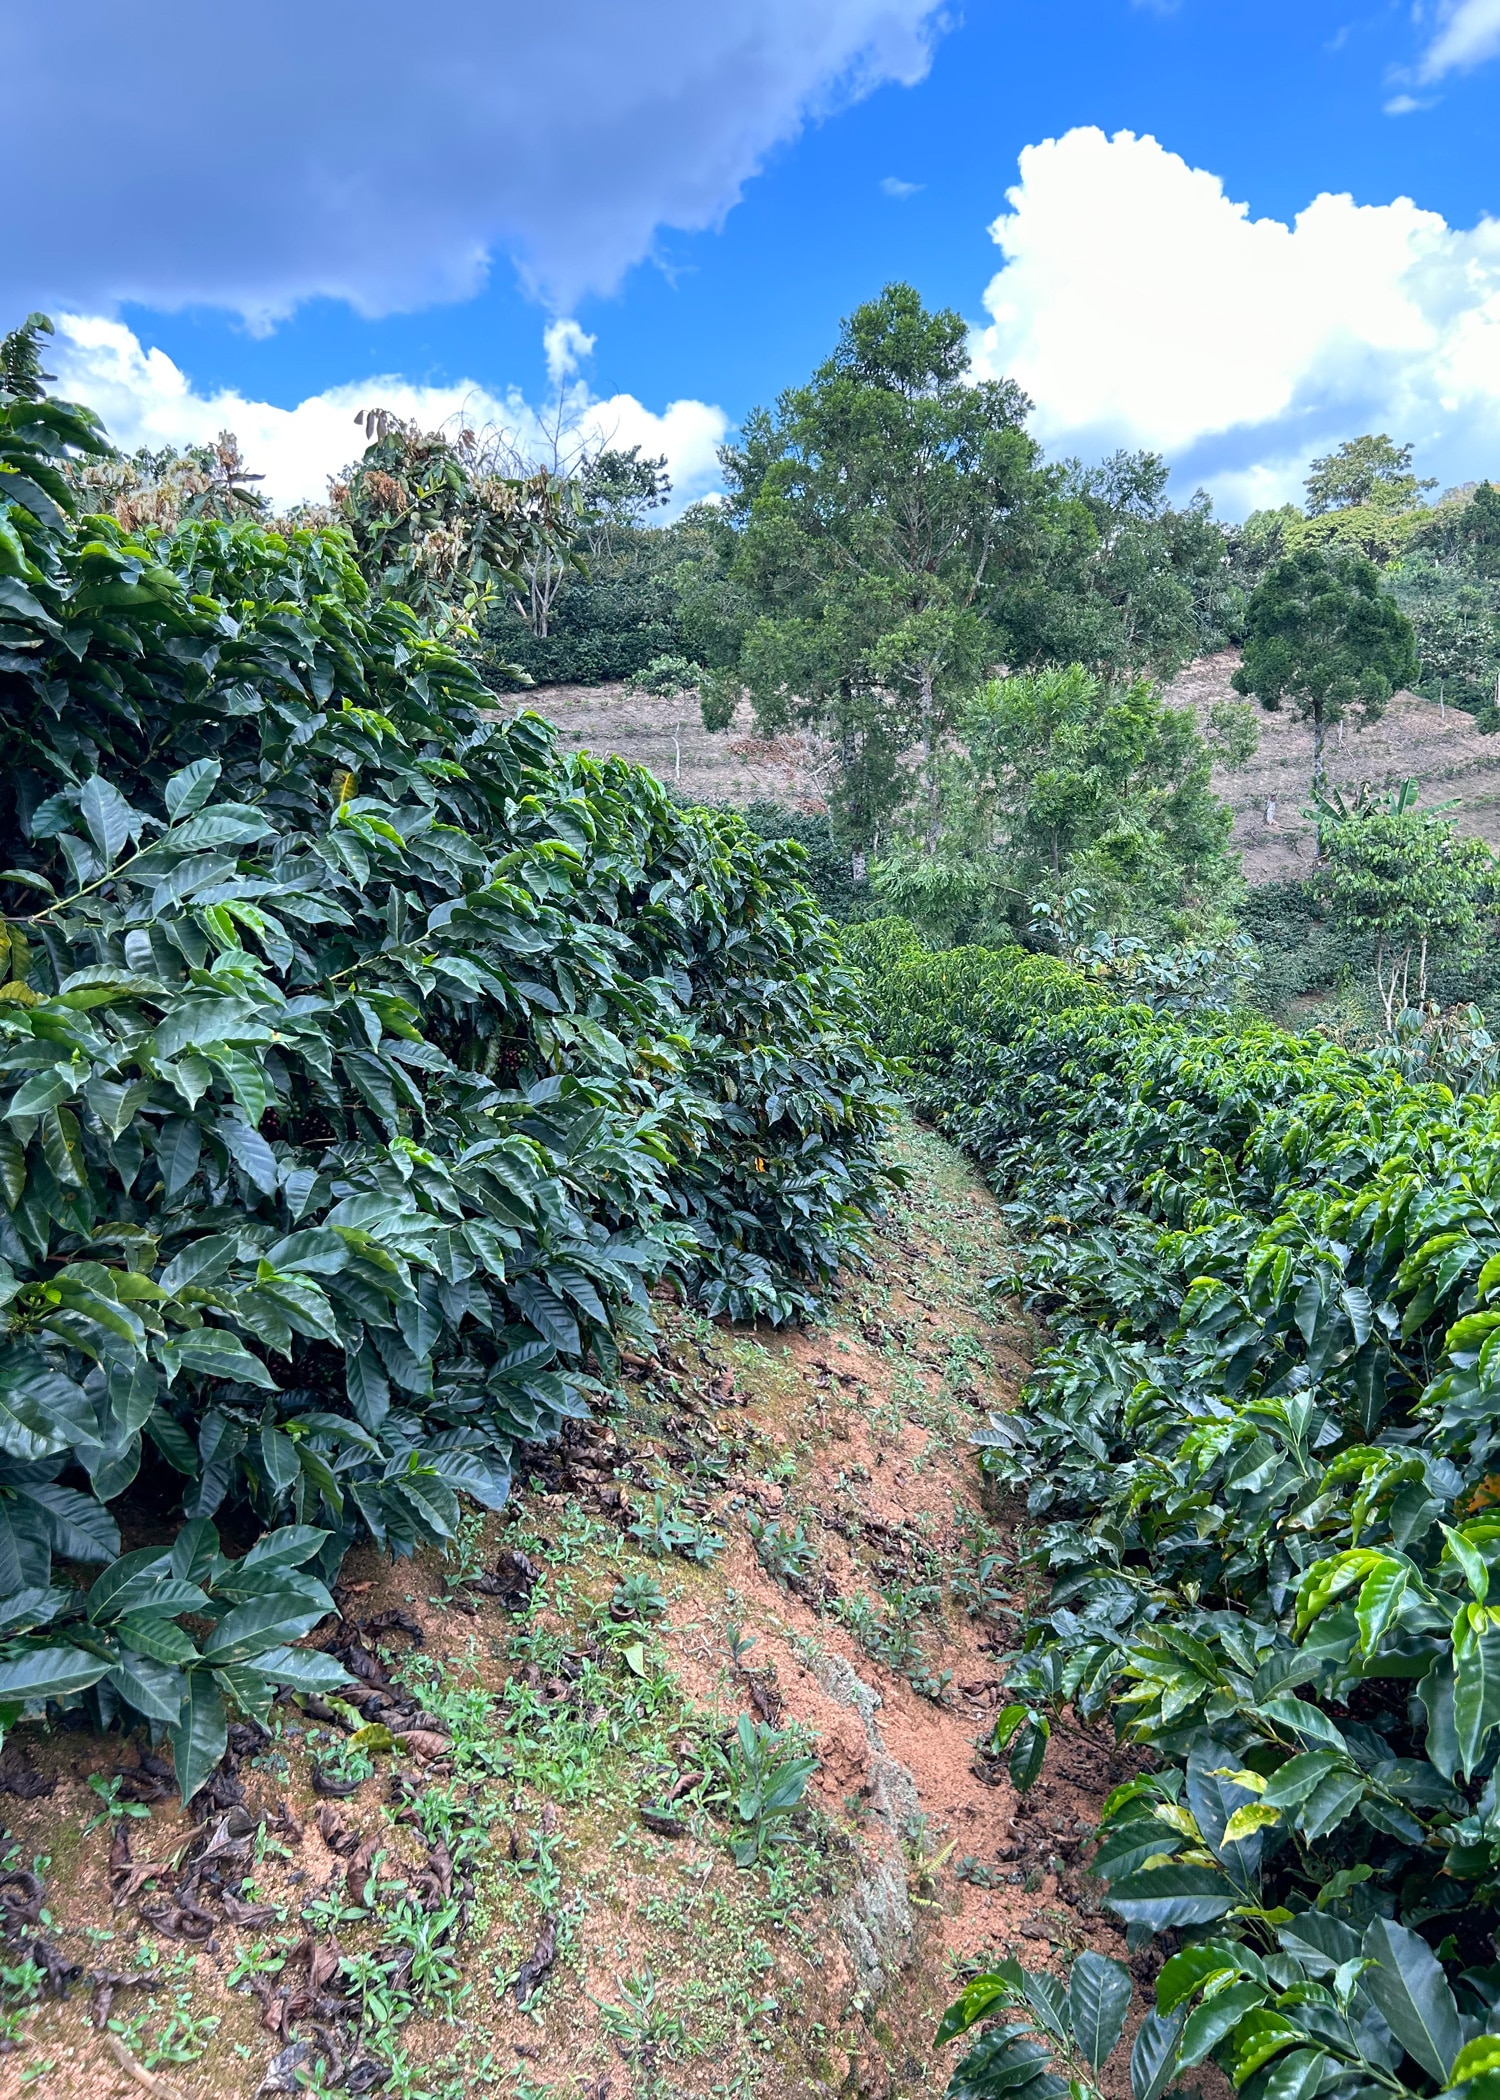 An example of ideal spacing between rows of coffee according to OCL.